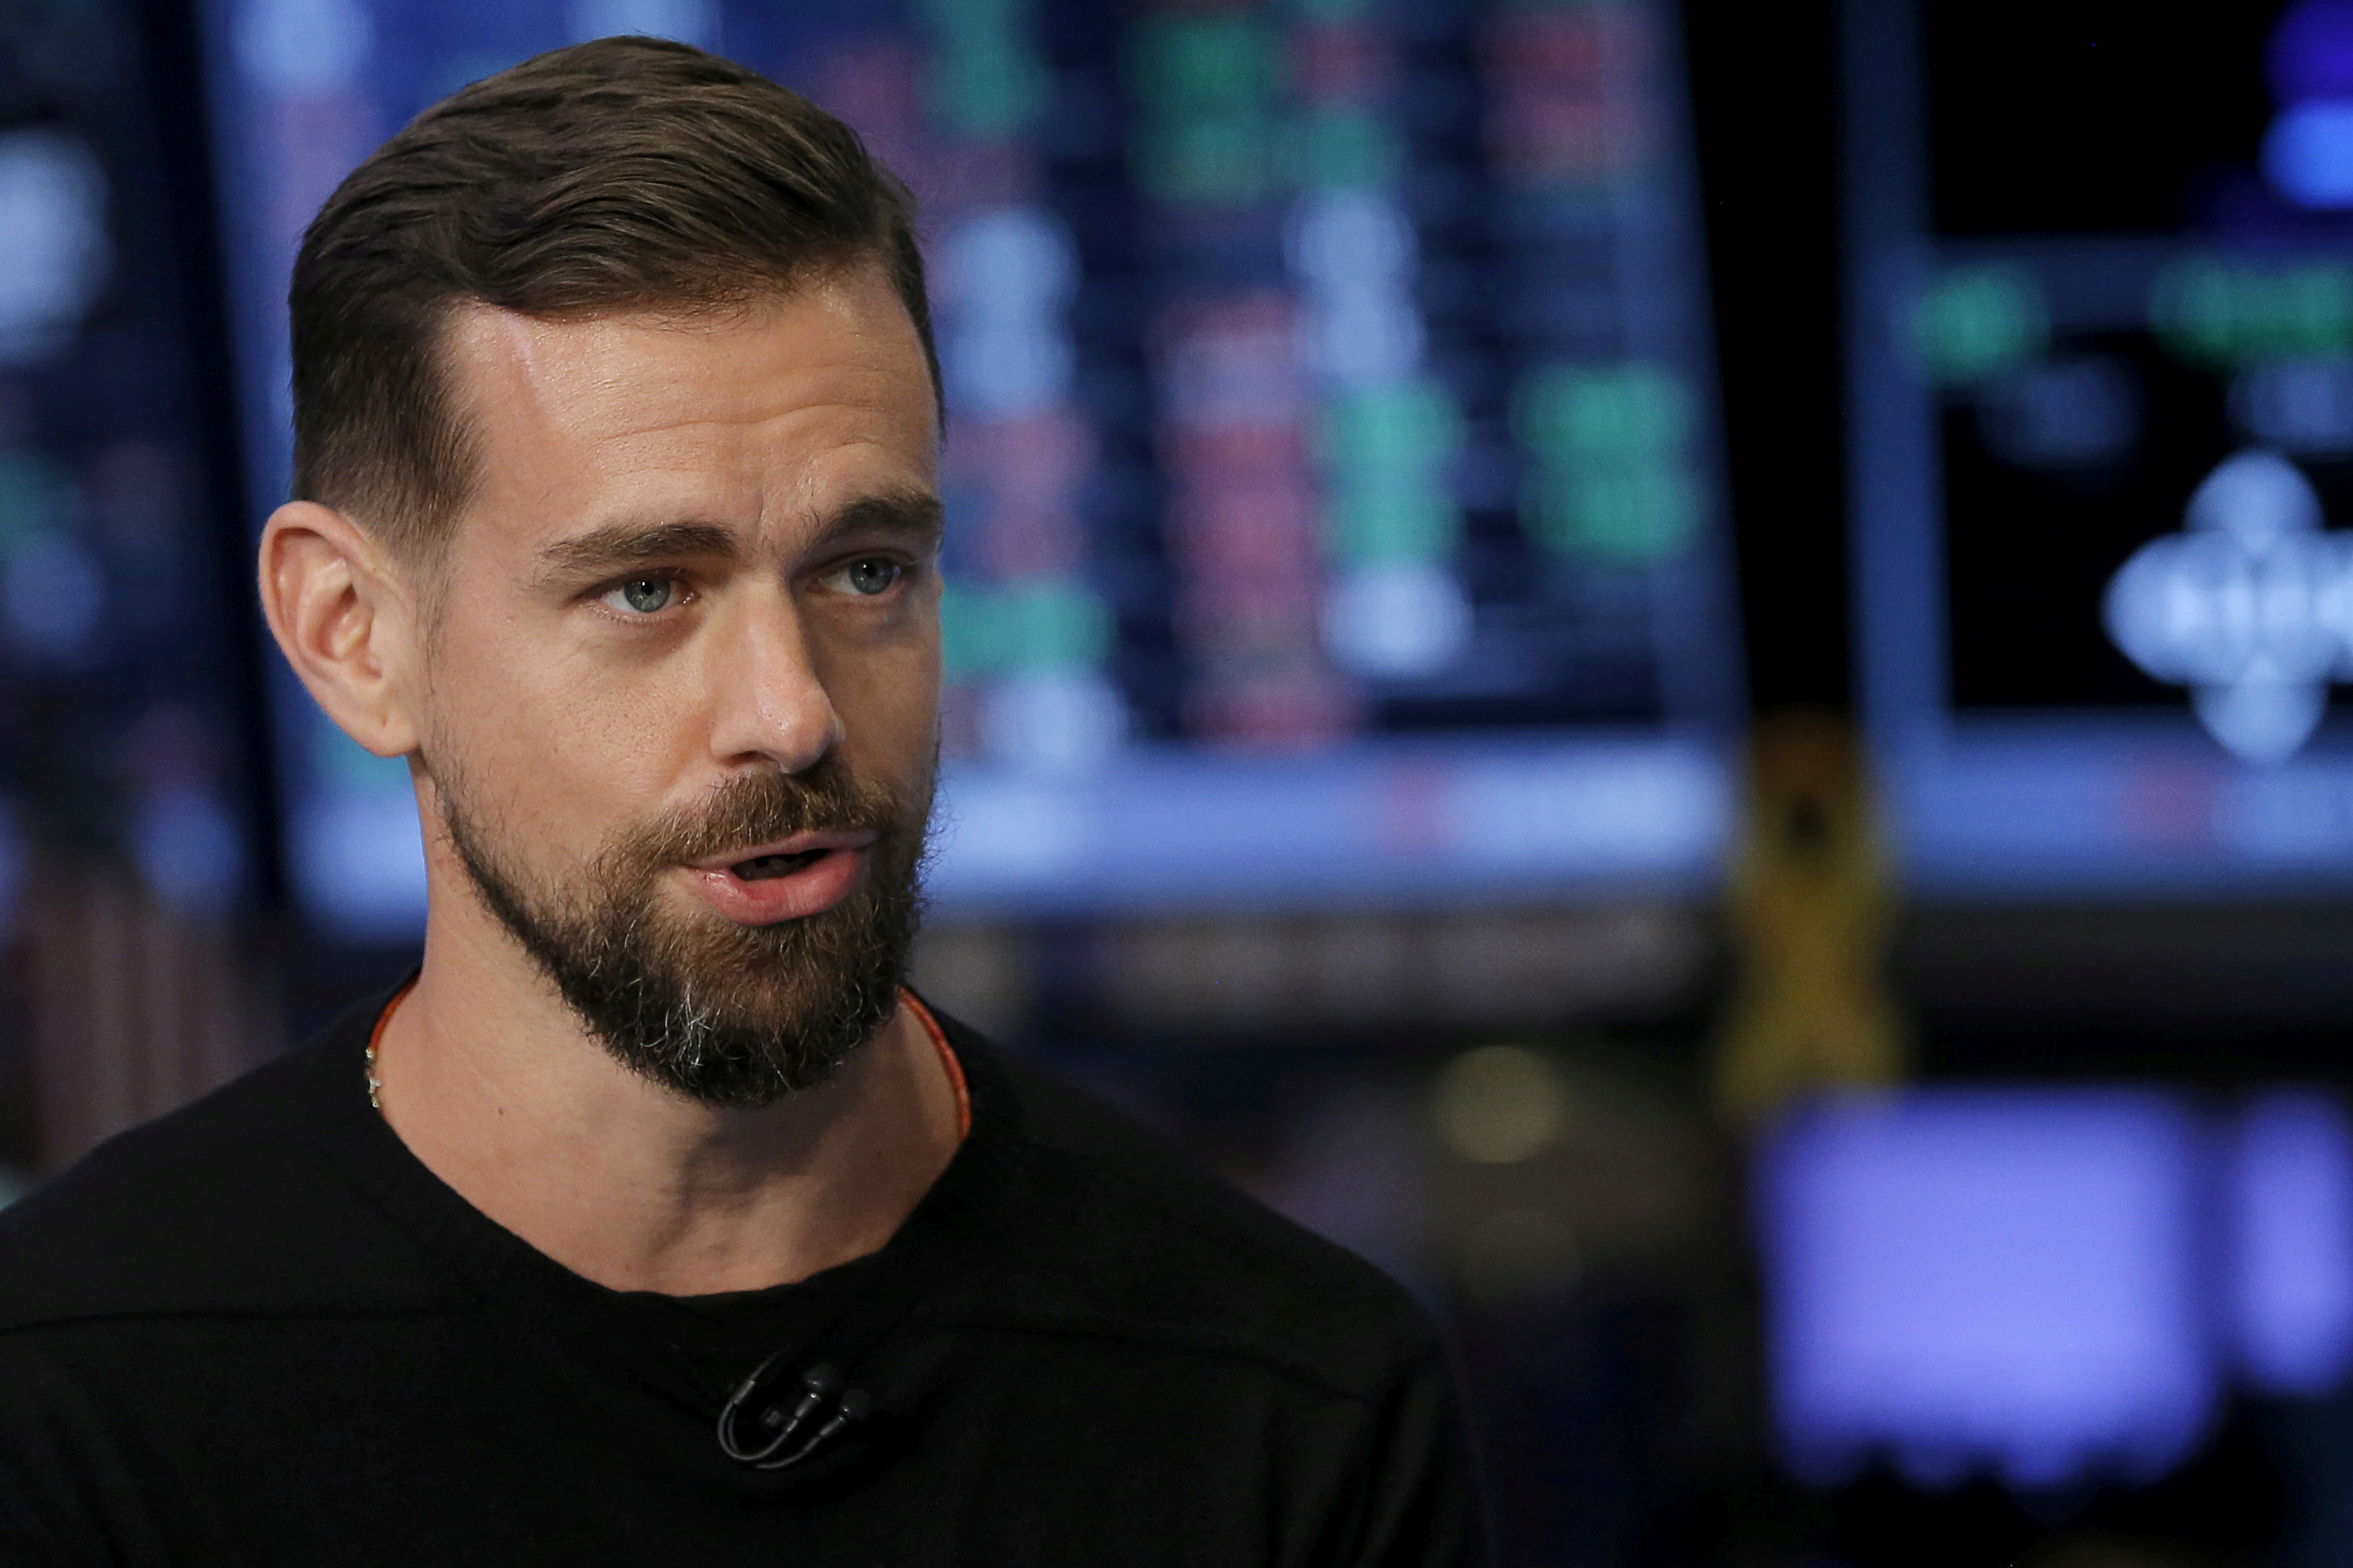 Jack Dorsey, CEO of Square and CEO of Twitter, speaks during an interview with CNBC following the IPO for Square Inc., on the floor of the New York Stock Exchange